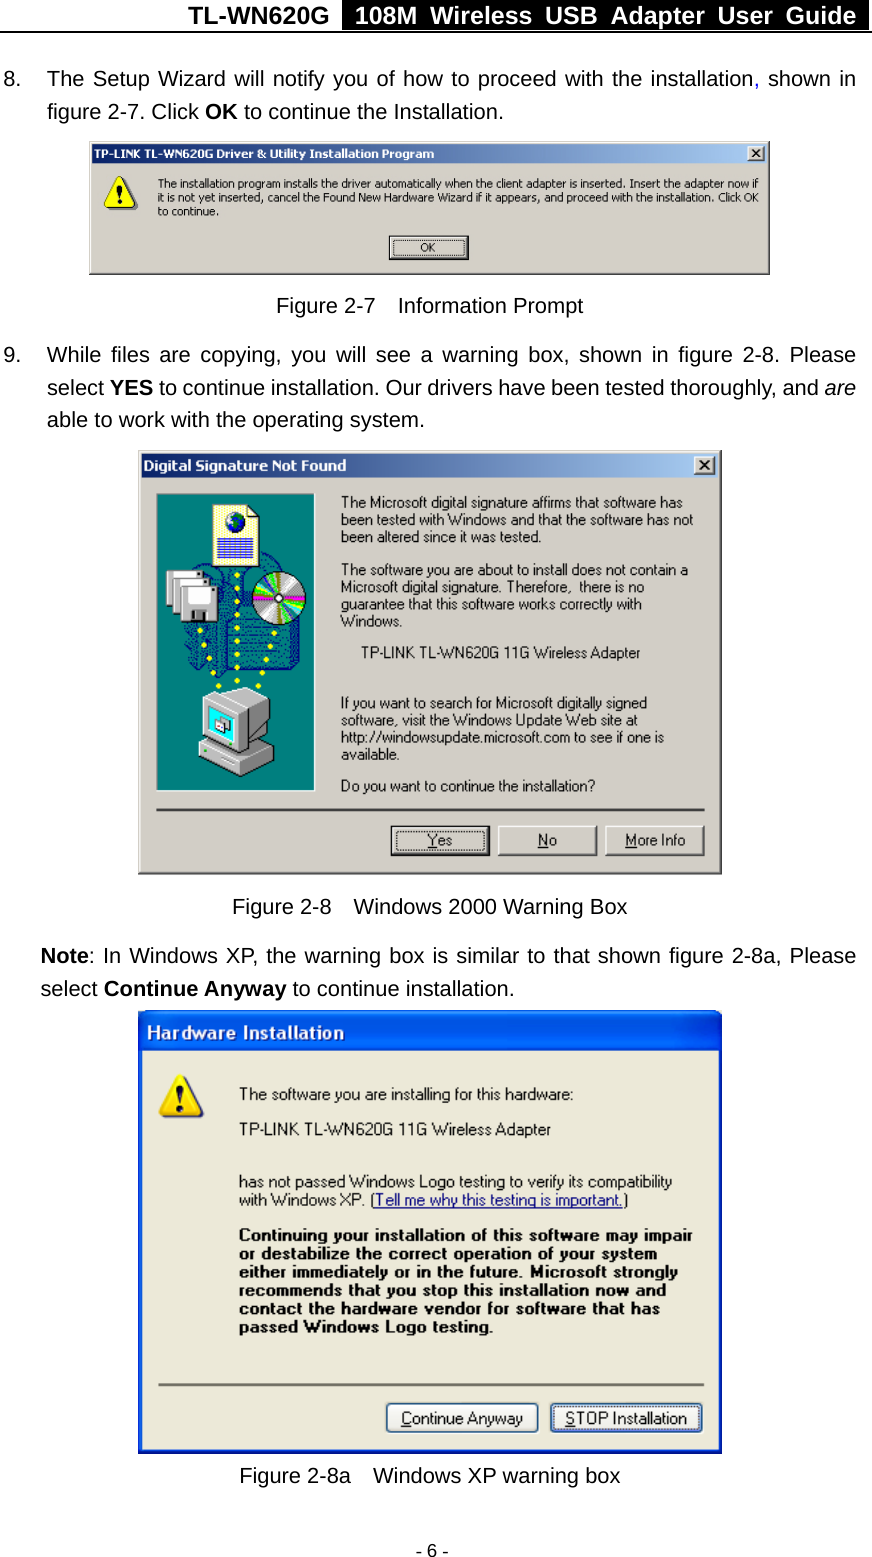 TL-WN620G   108M Wireless USB Adapter User Guide    - 6 -8.  The Setup Wizard will notify you of how to proceed with the installation, shown in figure 2-7. Click OK to continue the Installation.  Figure 2-7  Information Prompt 9.  While files are copying, you will see a warning box, shown in figure 2-8. Please select YES to continue installation. Our drivers have been tested thoroughly, and are able to work with the operating system.  Figure 2-8    Windows 2000 Warning Box Note: In Windows XP, the warning box is similar to that shown figure 2-8a, Please select Continue Anyway to continue installation.  Figure 2-8a    Windows XP warning box 